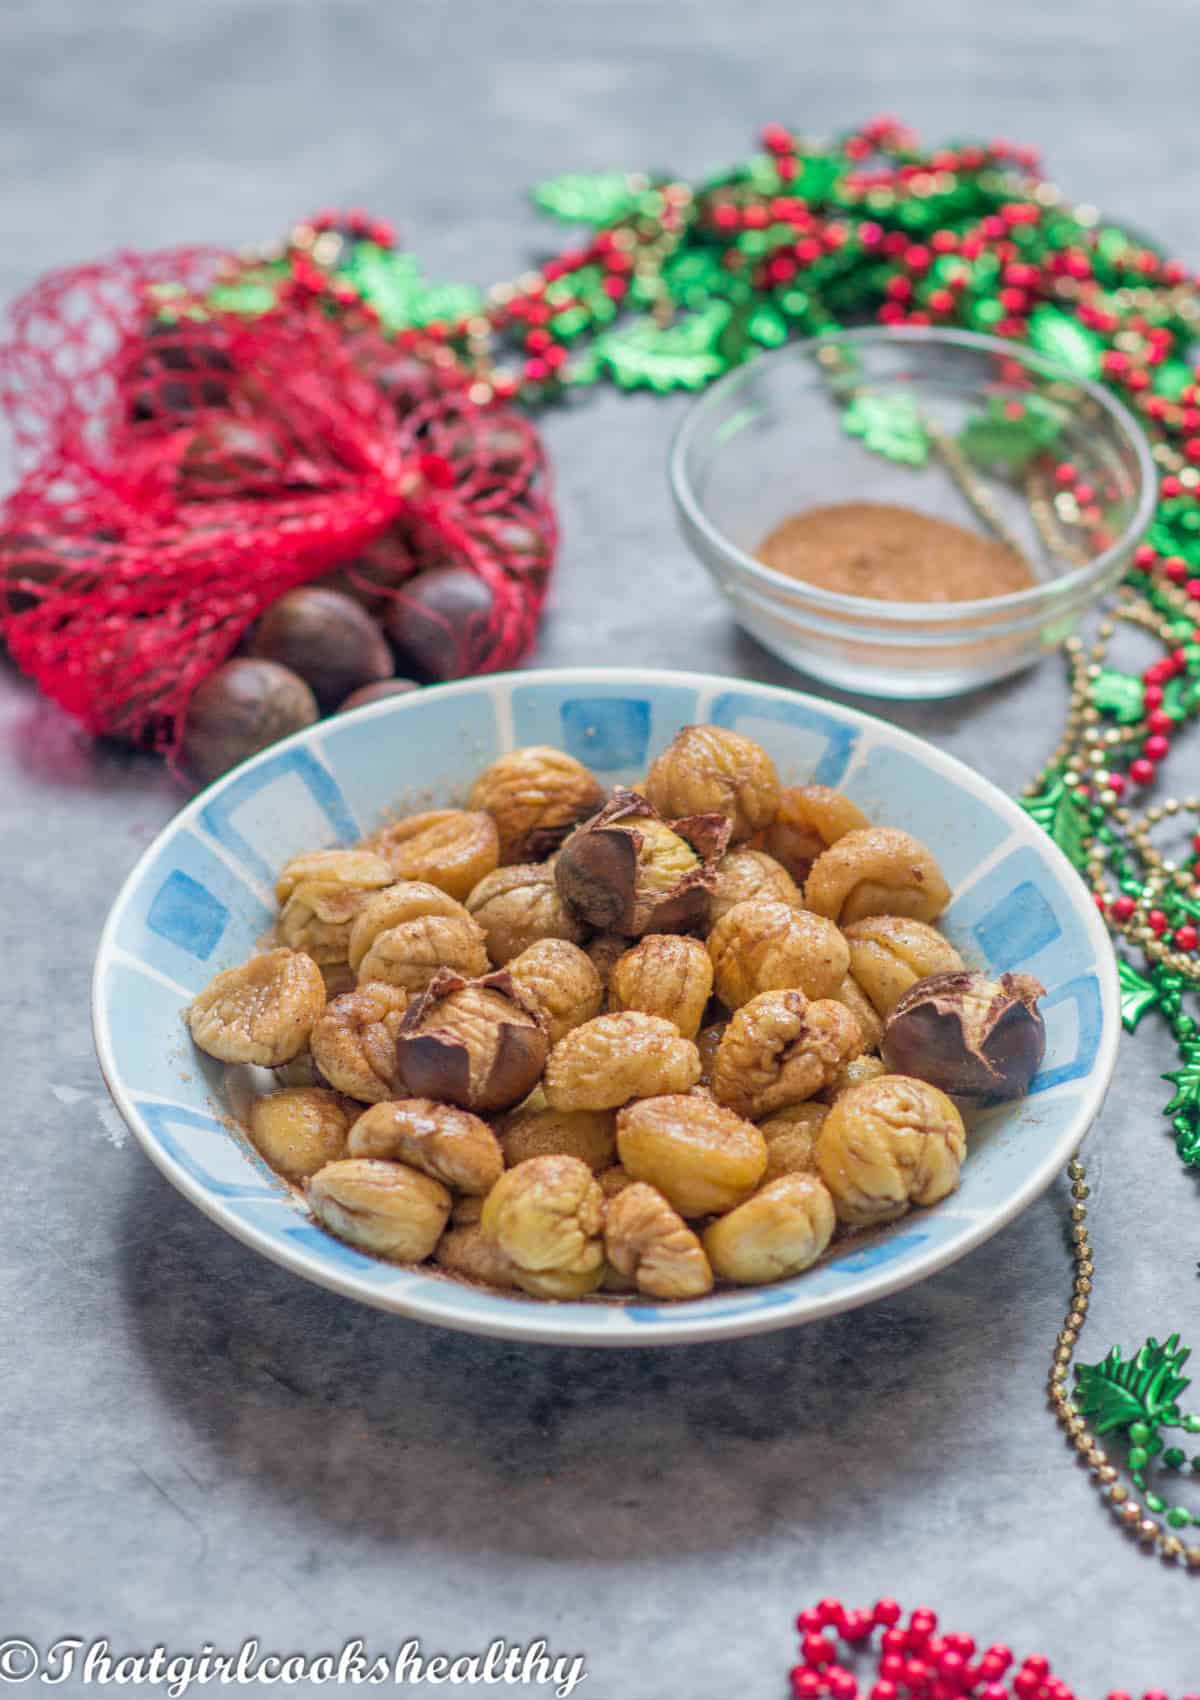 Chestnuts in a blue dish with decor